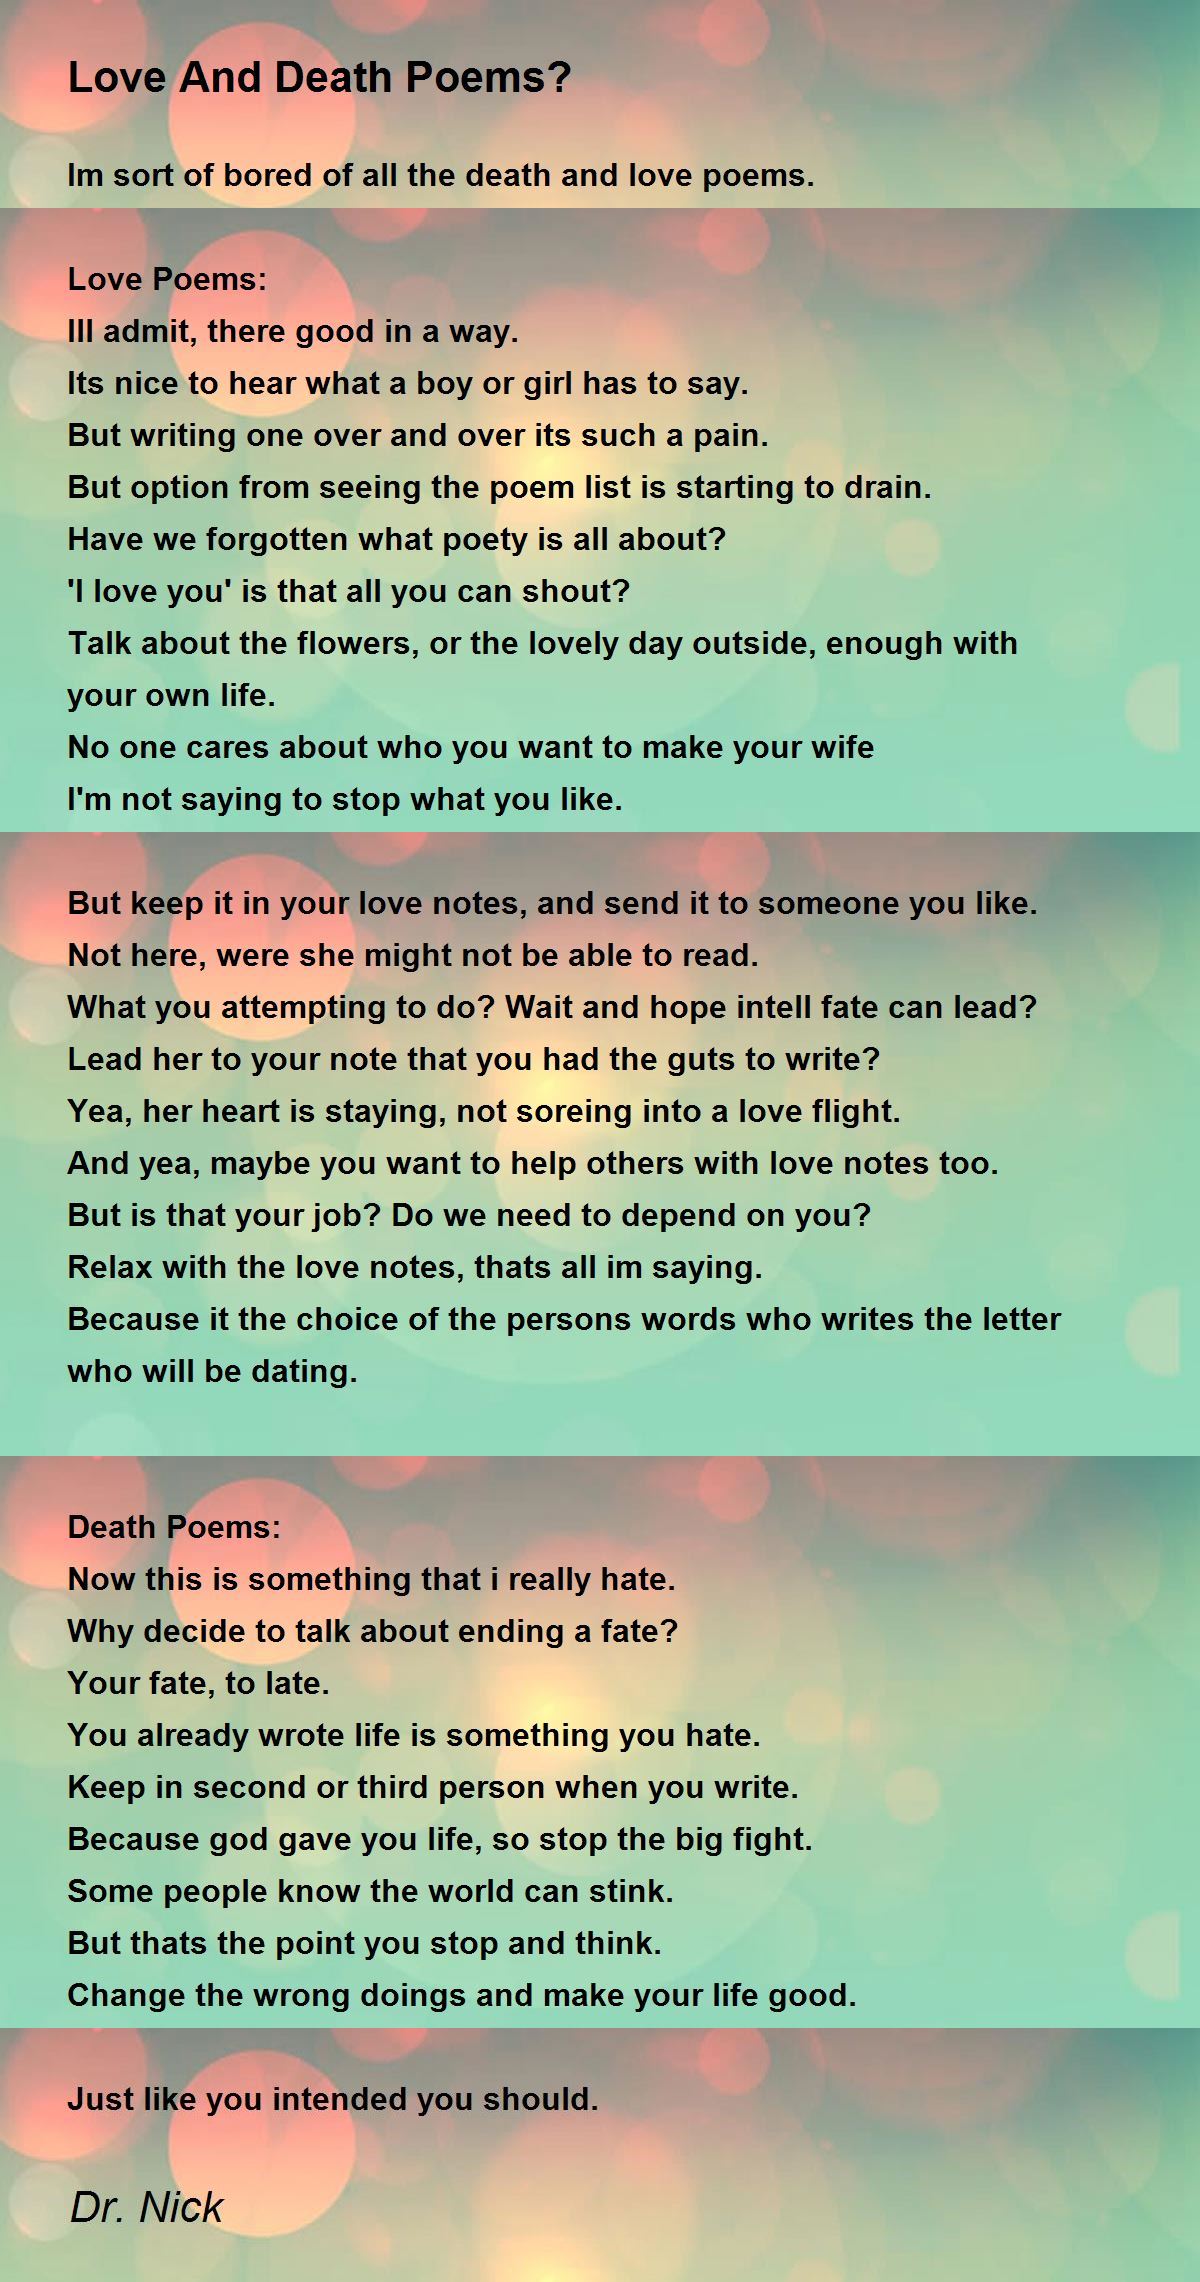 Love And Death Poems? by Dr. Nick - Love And Death Poems? Poem